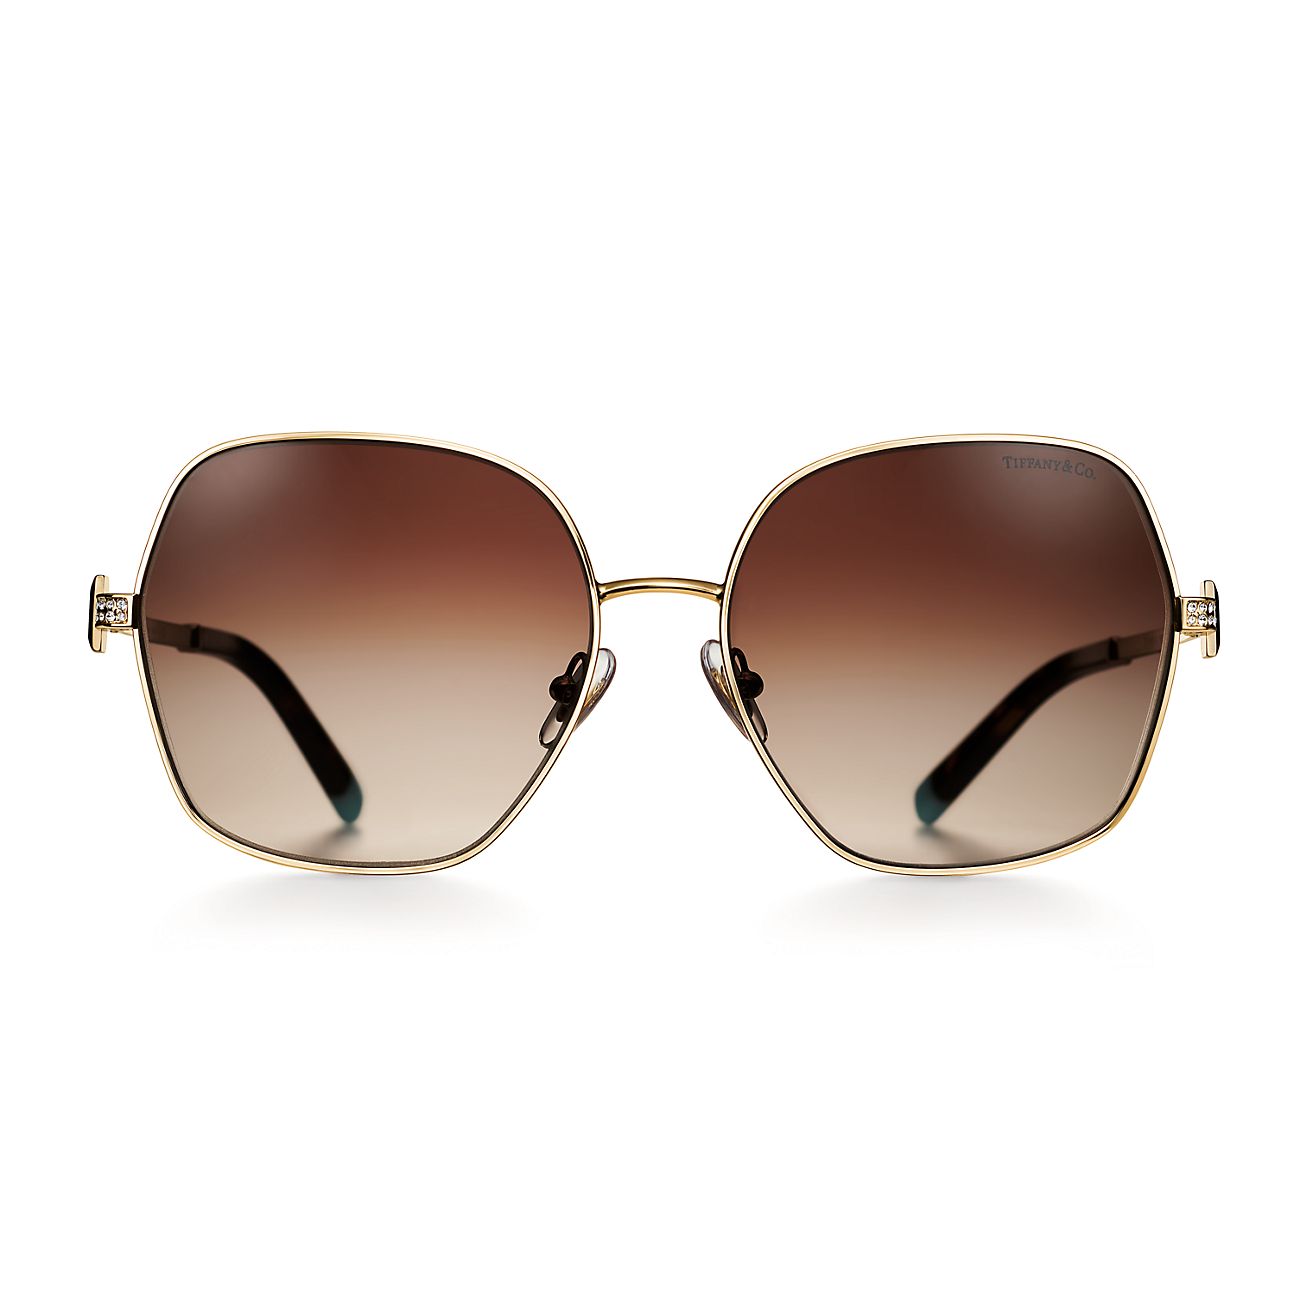 Tiffany T Sunglasses in Pale Gold-coloured Metal with Gradient 